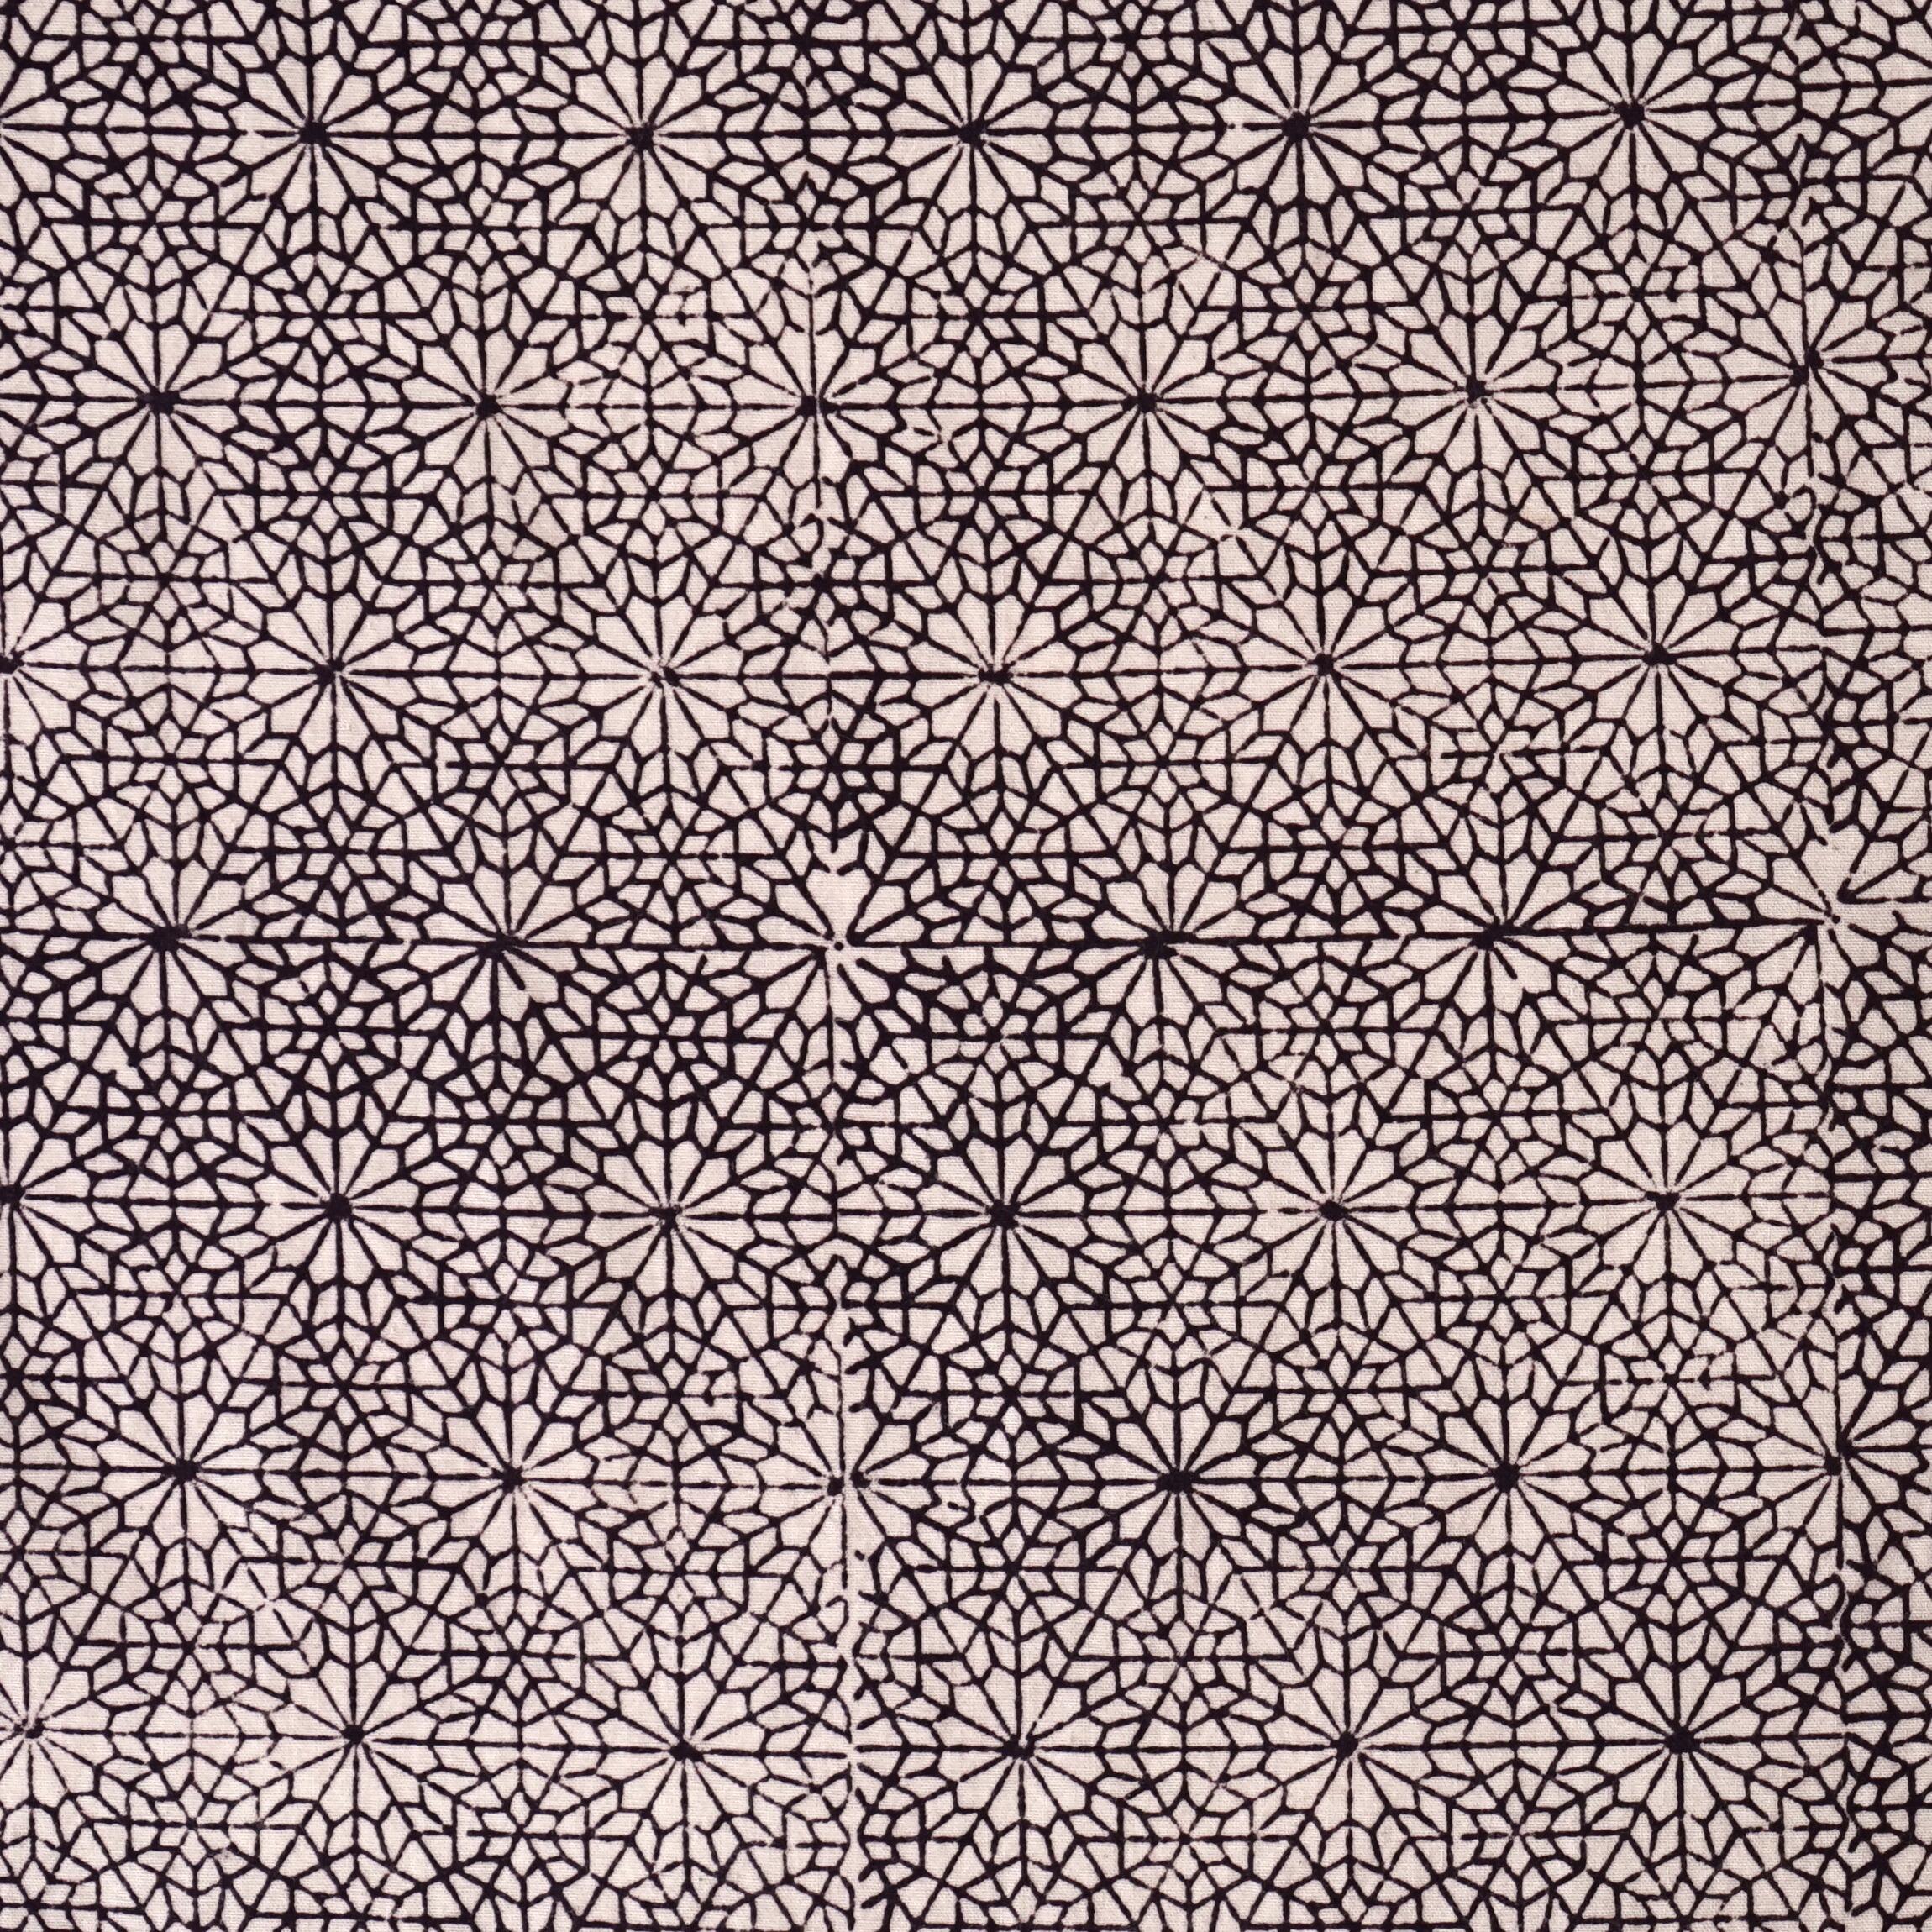 100% Block-Printed Cotton Fabric From India - Bagh Printing Method - Black 6 Degrees Design - Flat